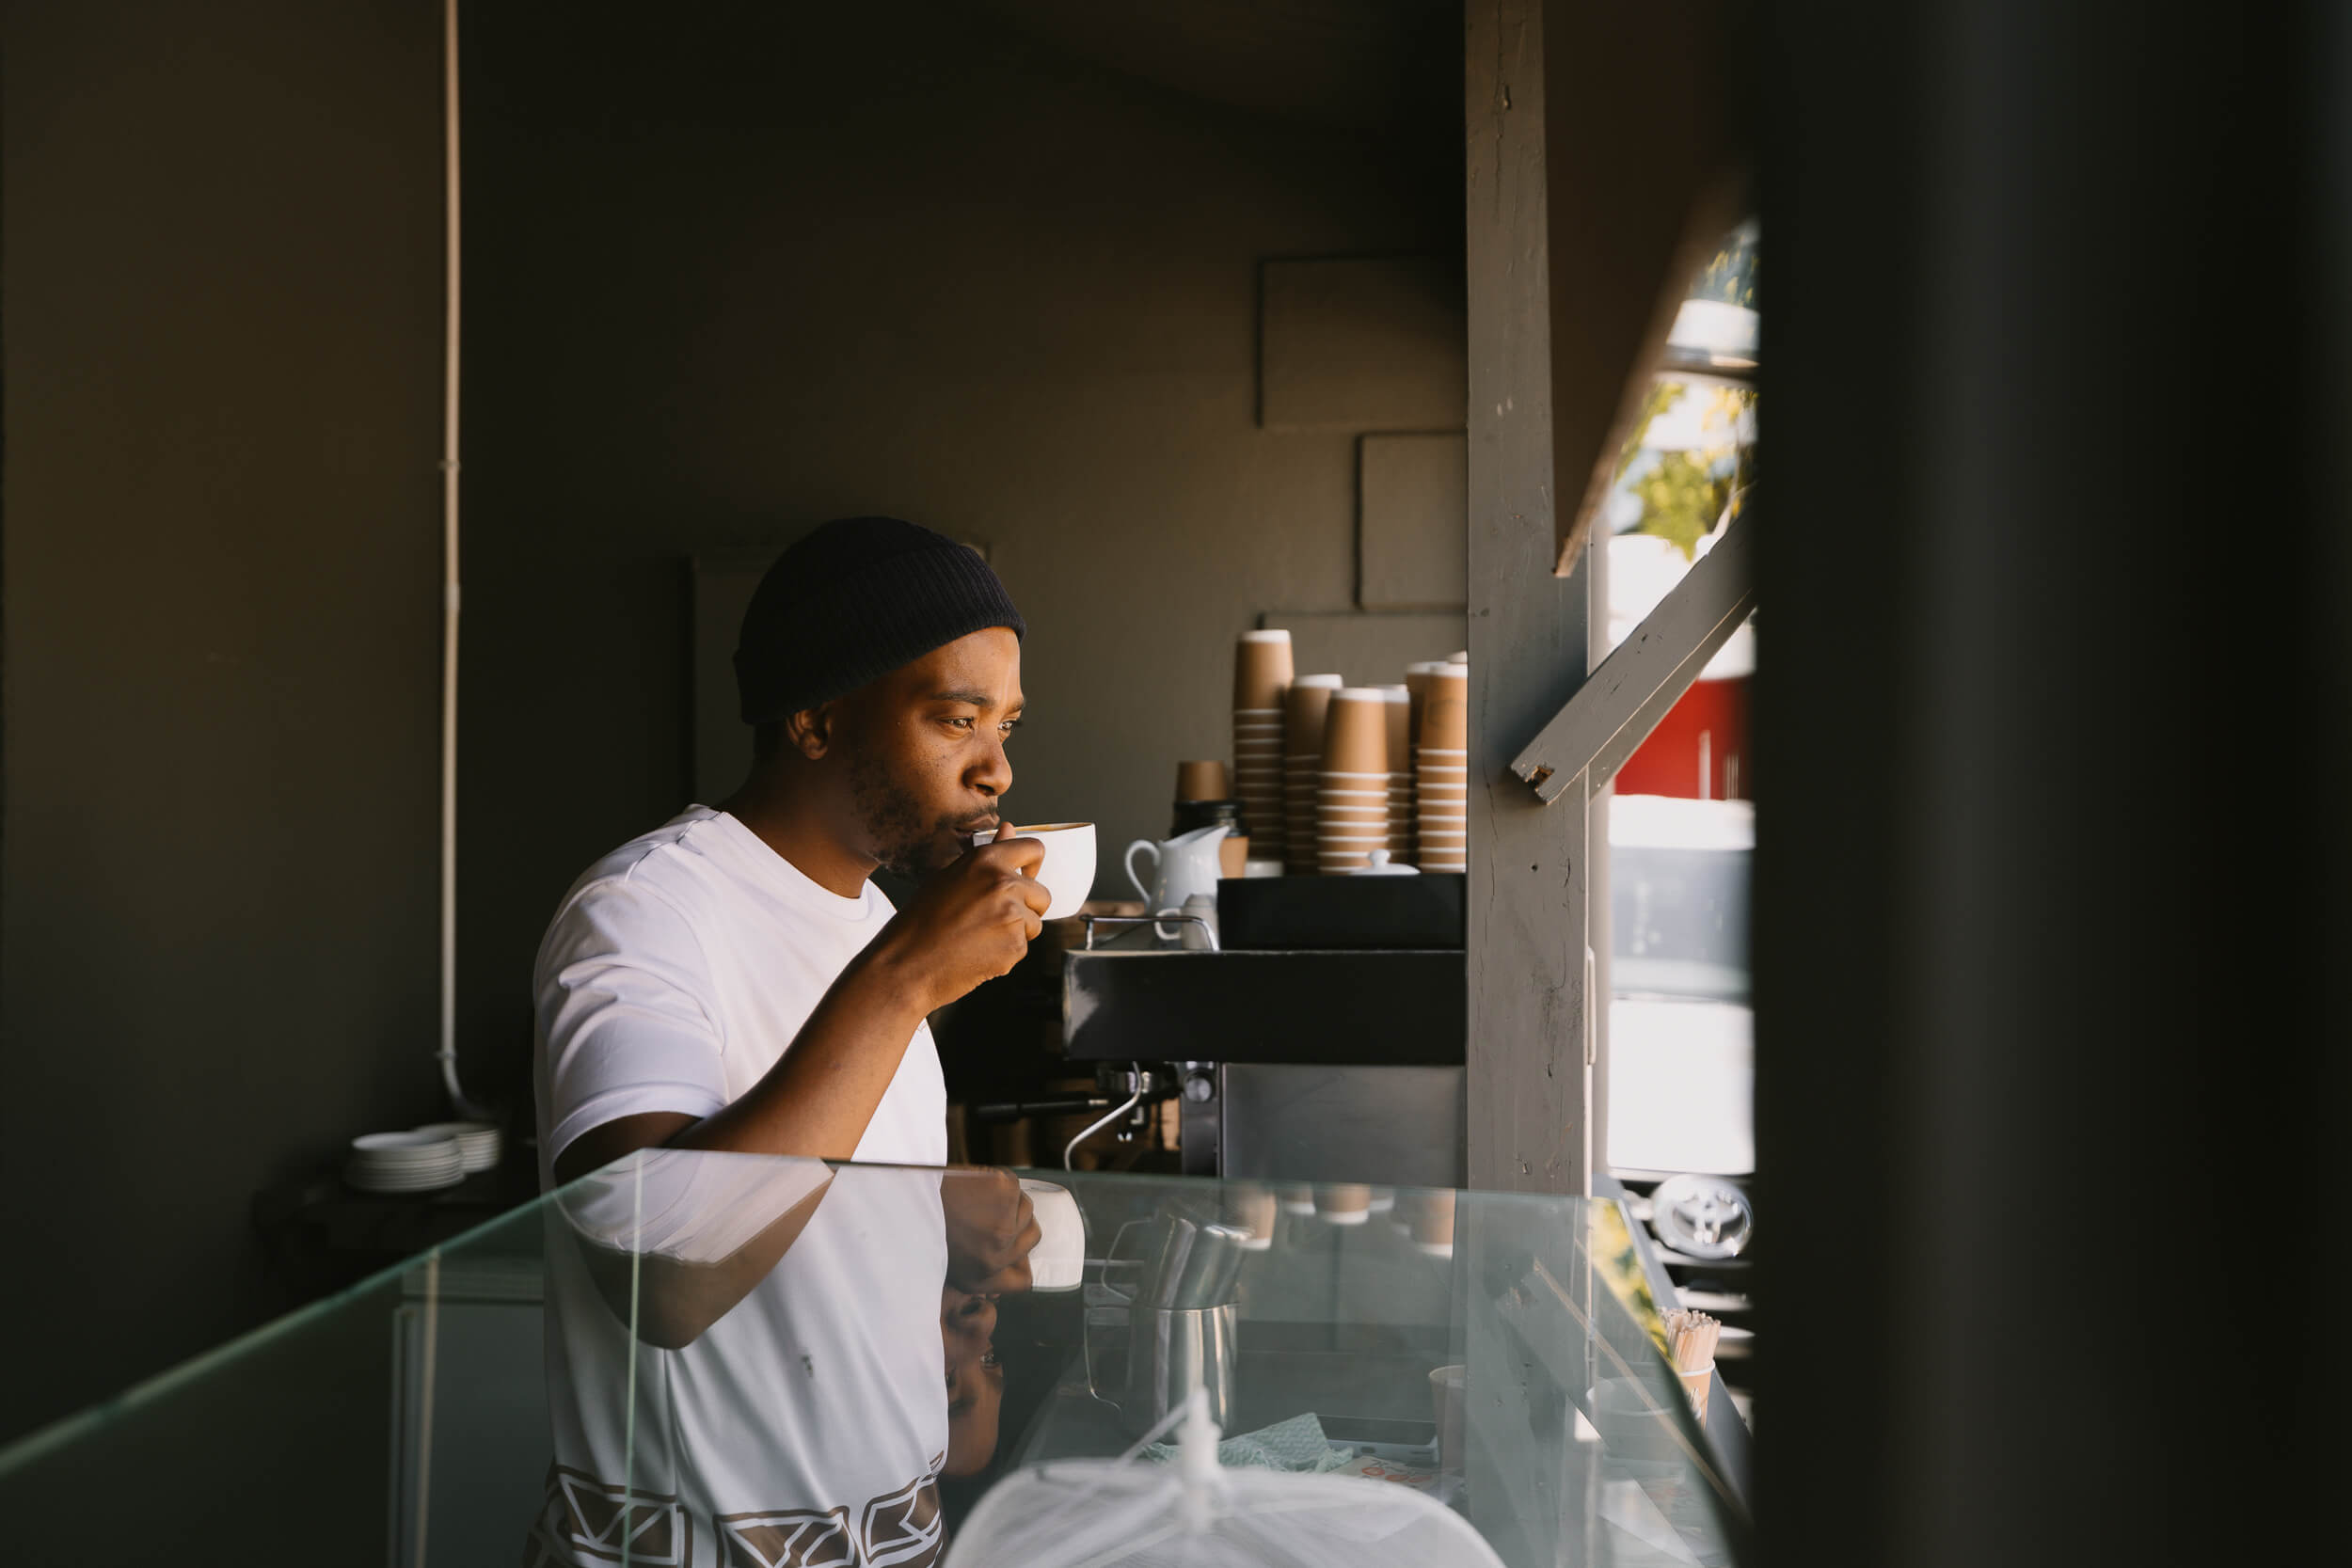 Siki's barista sipping on a coffee.